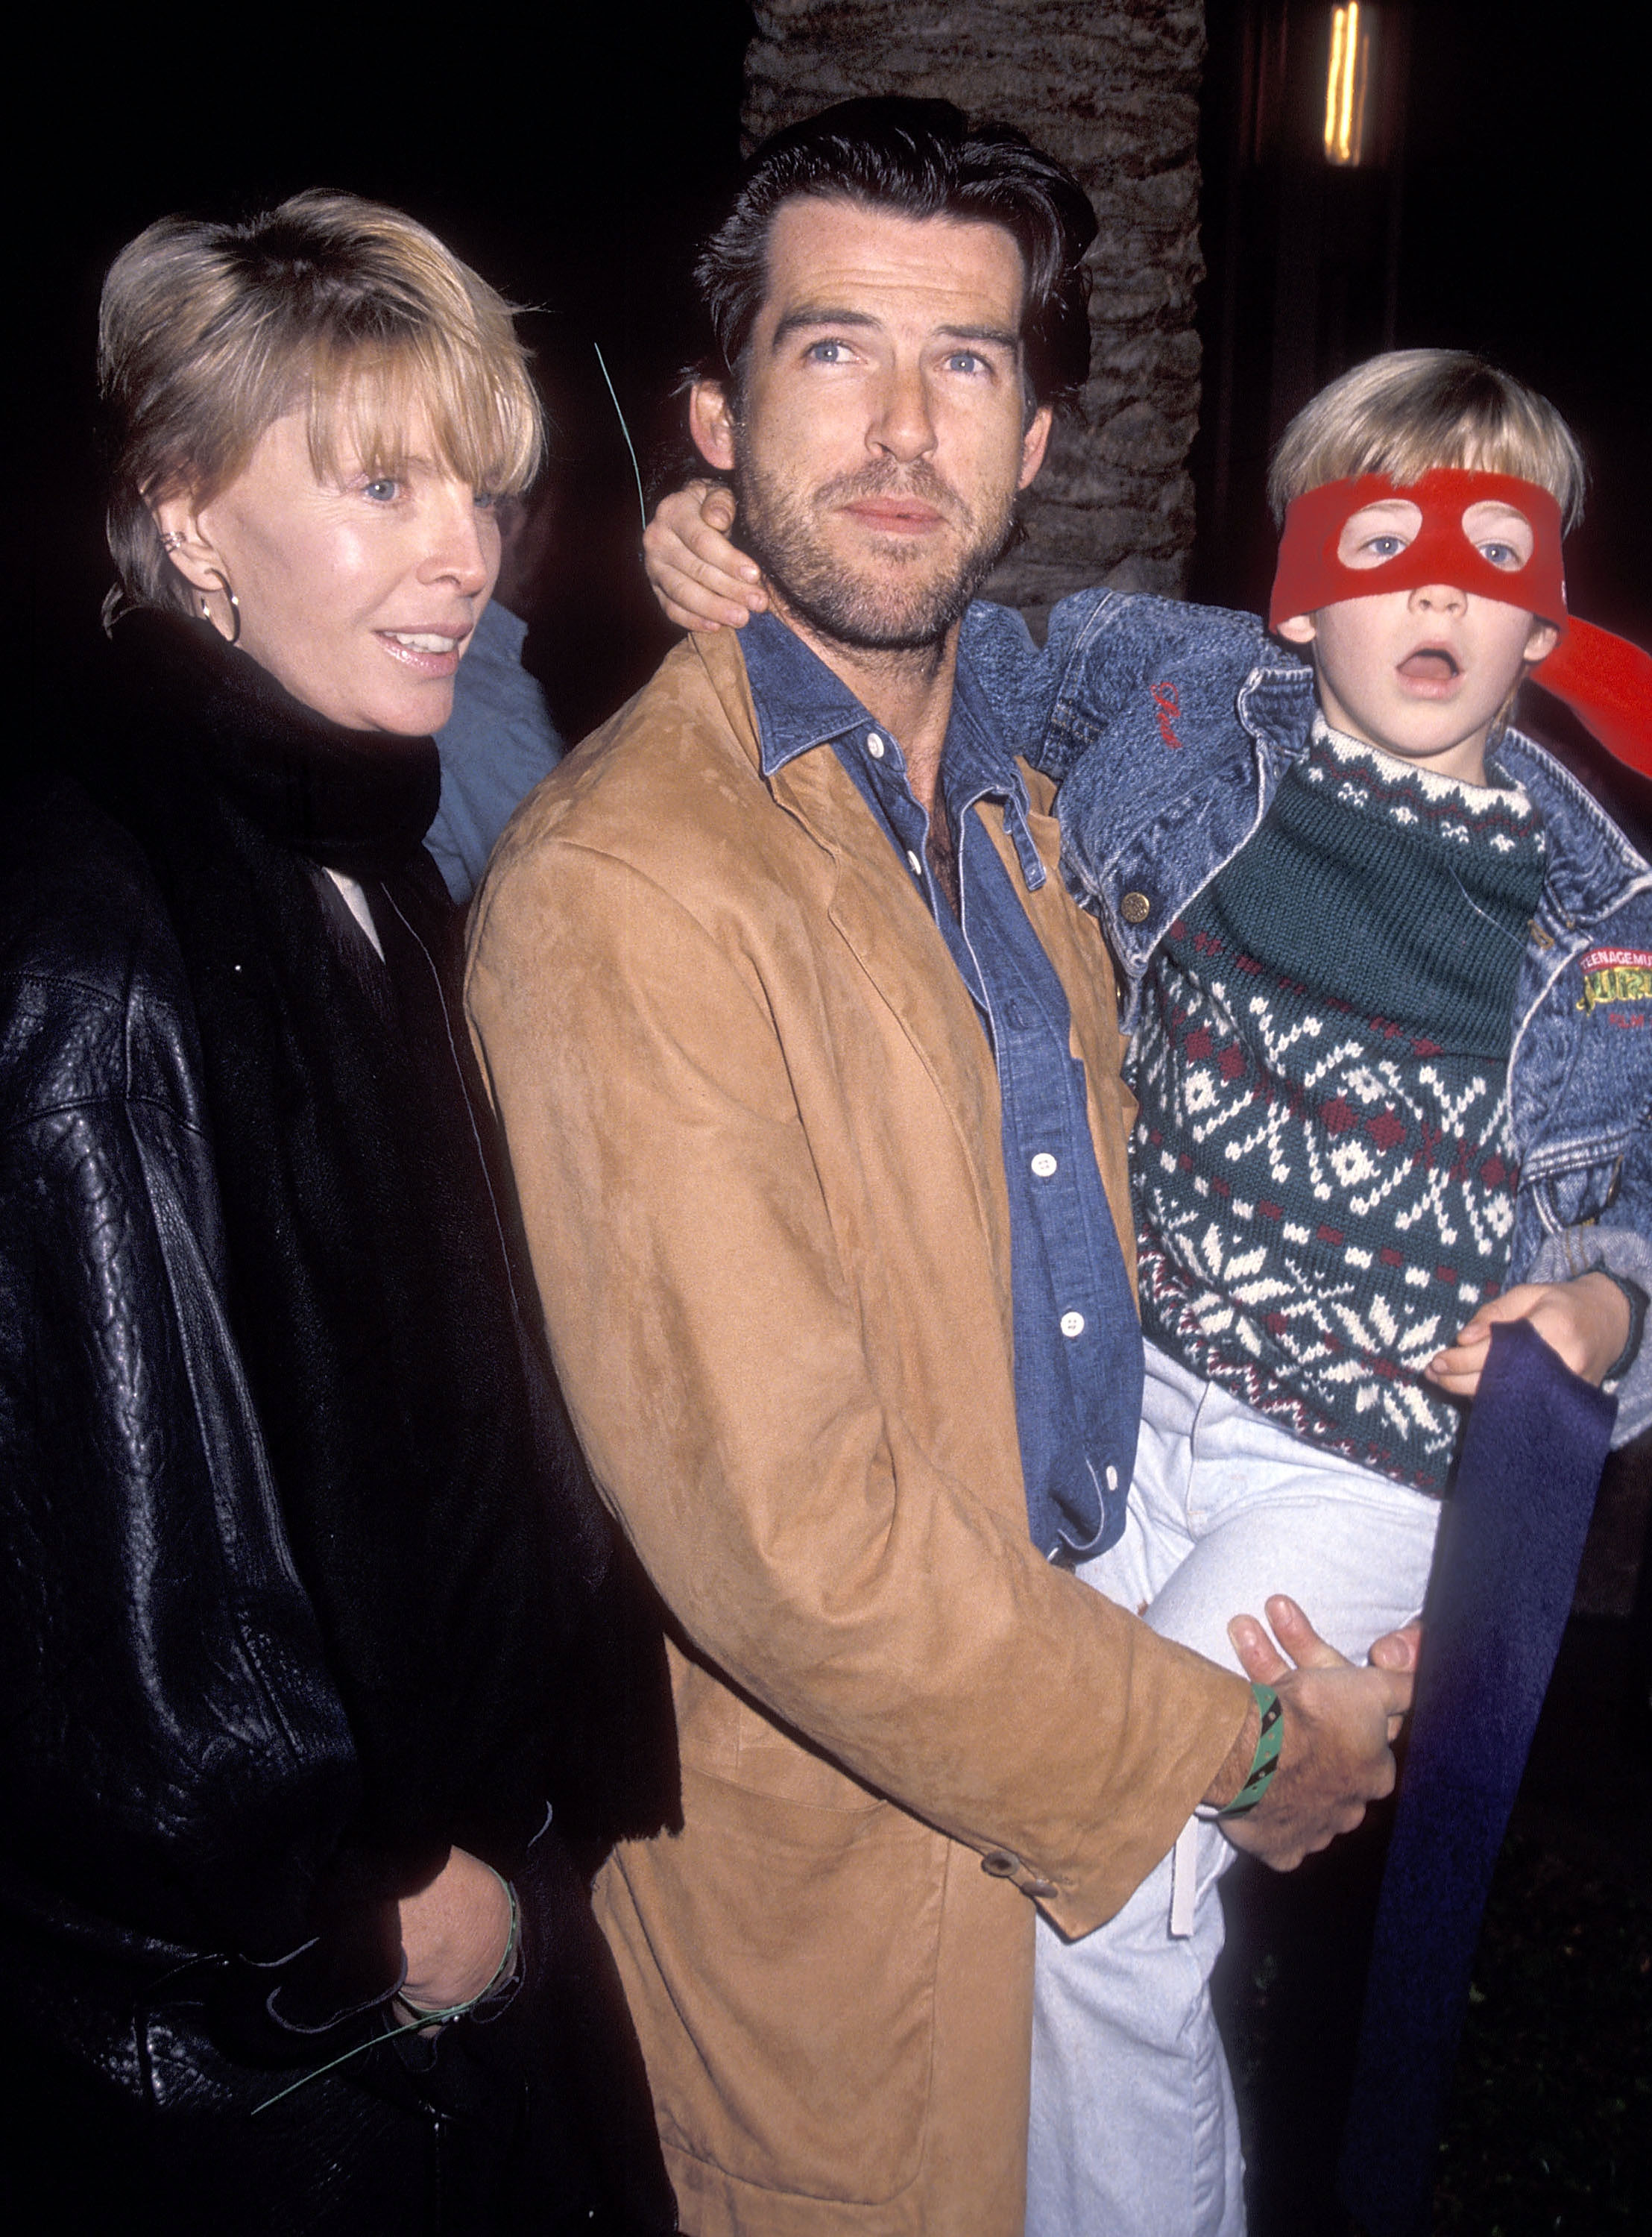 Cassandra Harris, Pierce Brosnan, and Sean Brosnan at the rock and roll tour of the Teenage Mutant Ninja Turtle's "Coming Out of Their Shells" on November 21, 1990 in California | Source: Getty Images